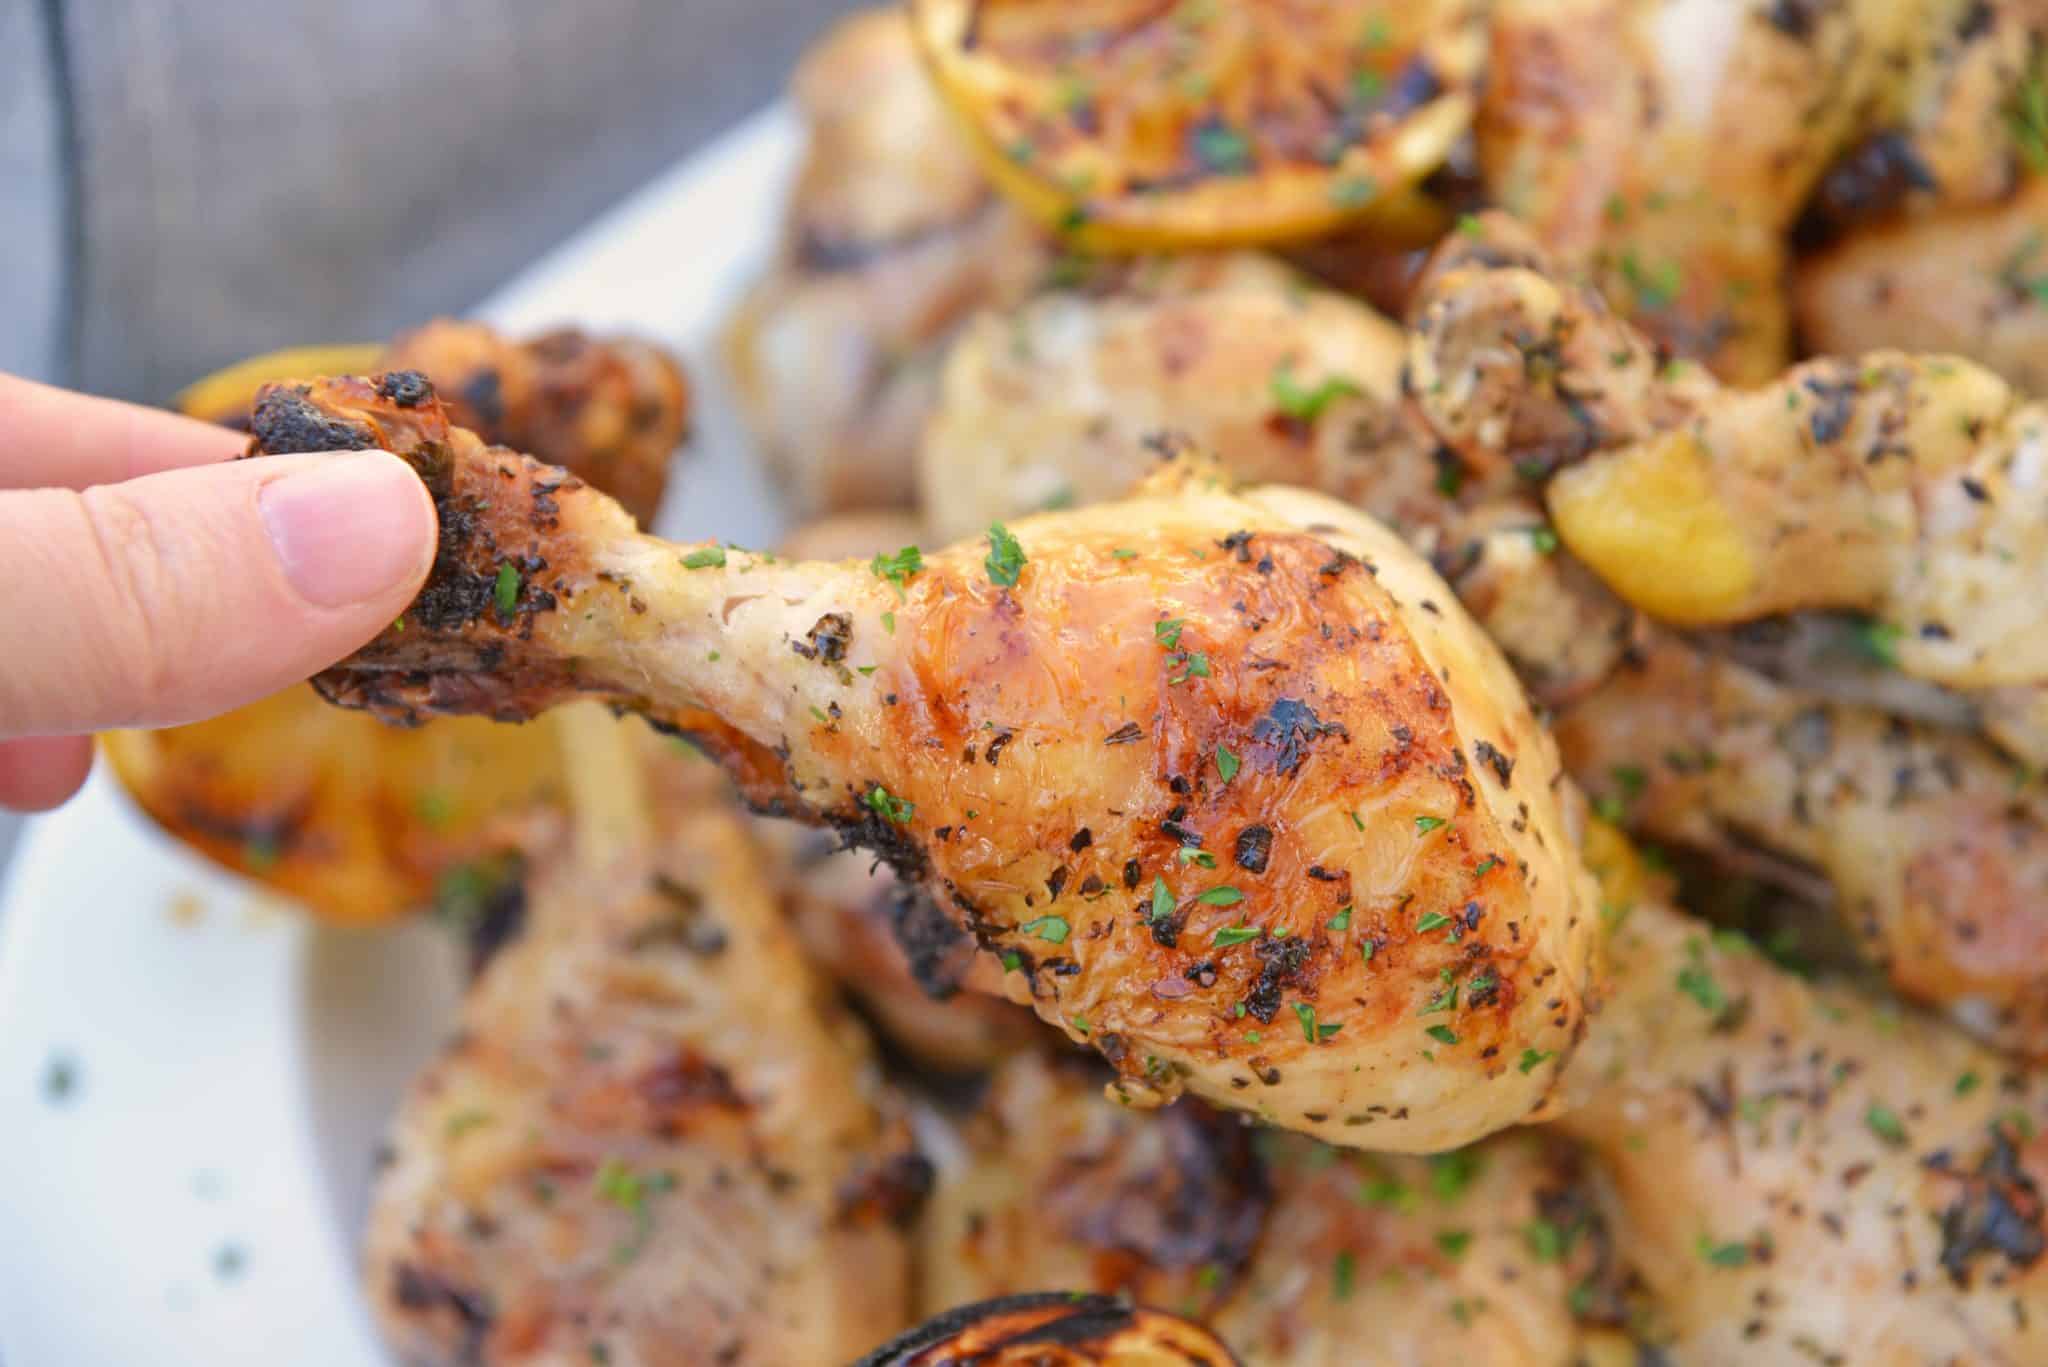 Grilled Lemon Pepper Chicken is made up of a simple marinade for foolproof chicken on the grill every time! This recipe is so simple and turns out the great! #lemonchicken #lemonpepperchicken www.savoryexperiments.com